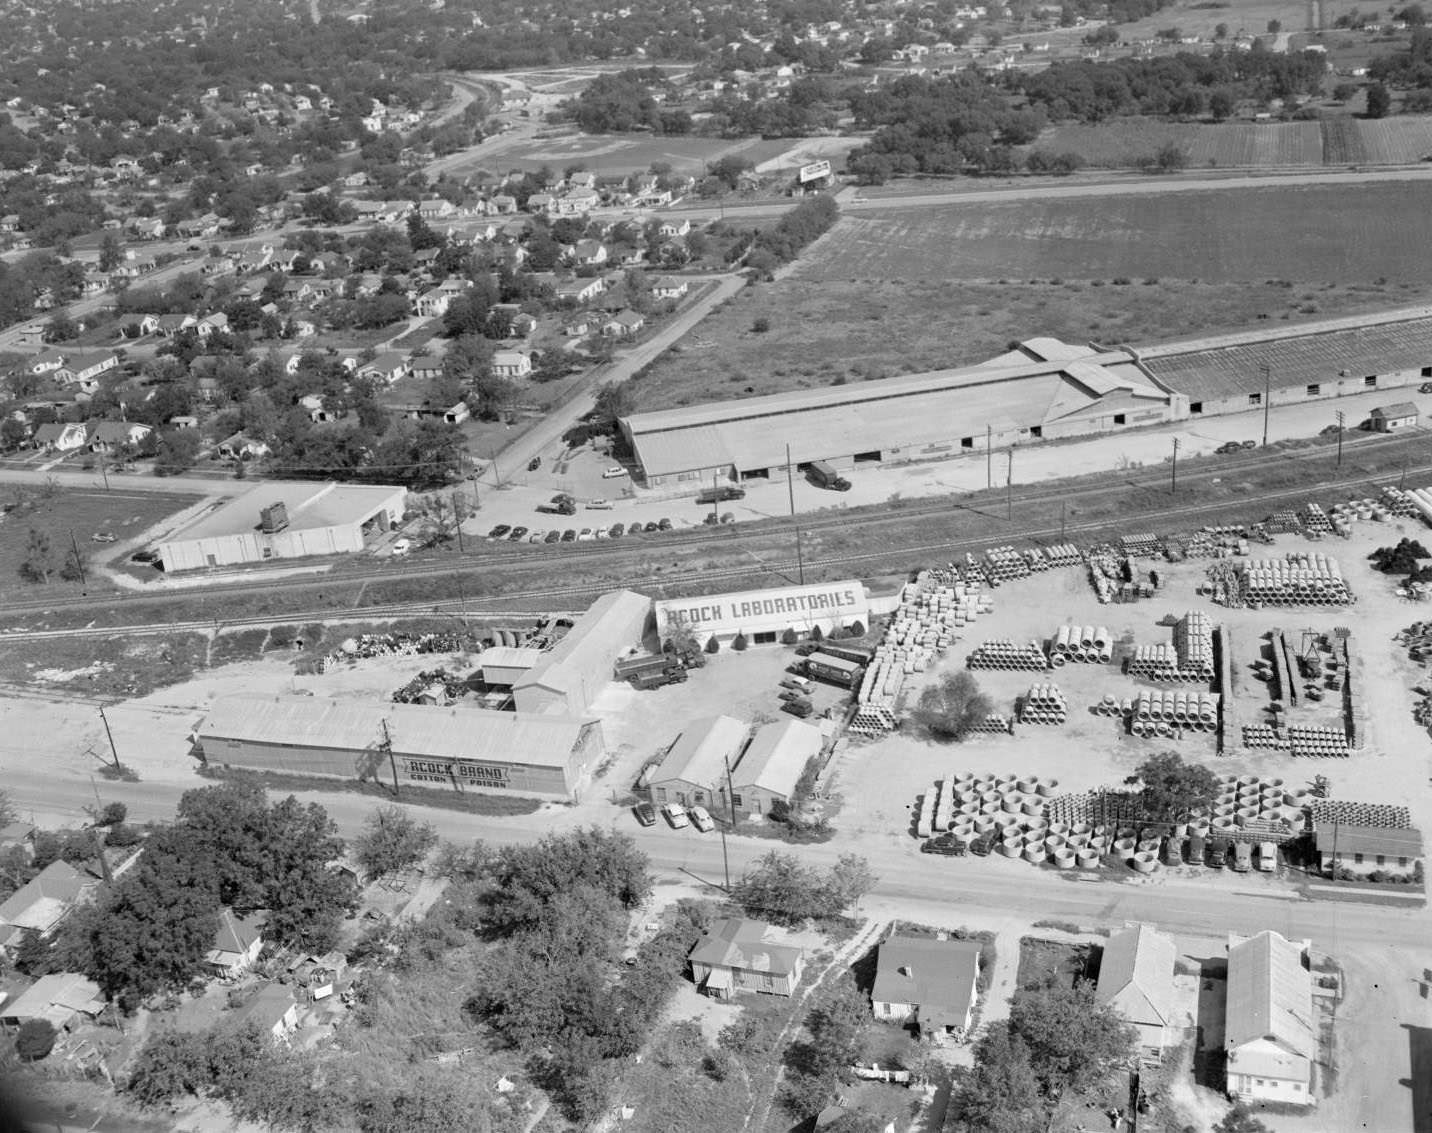 An aerial view of Acock Laboratories, 1954